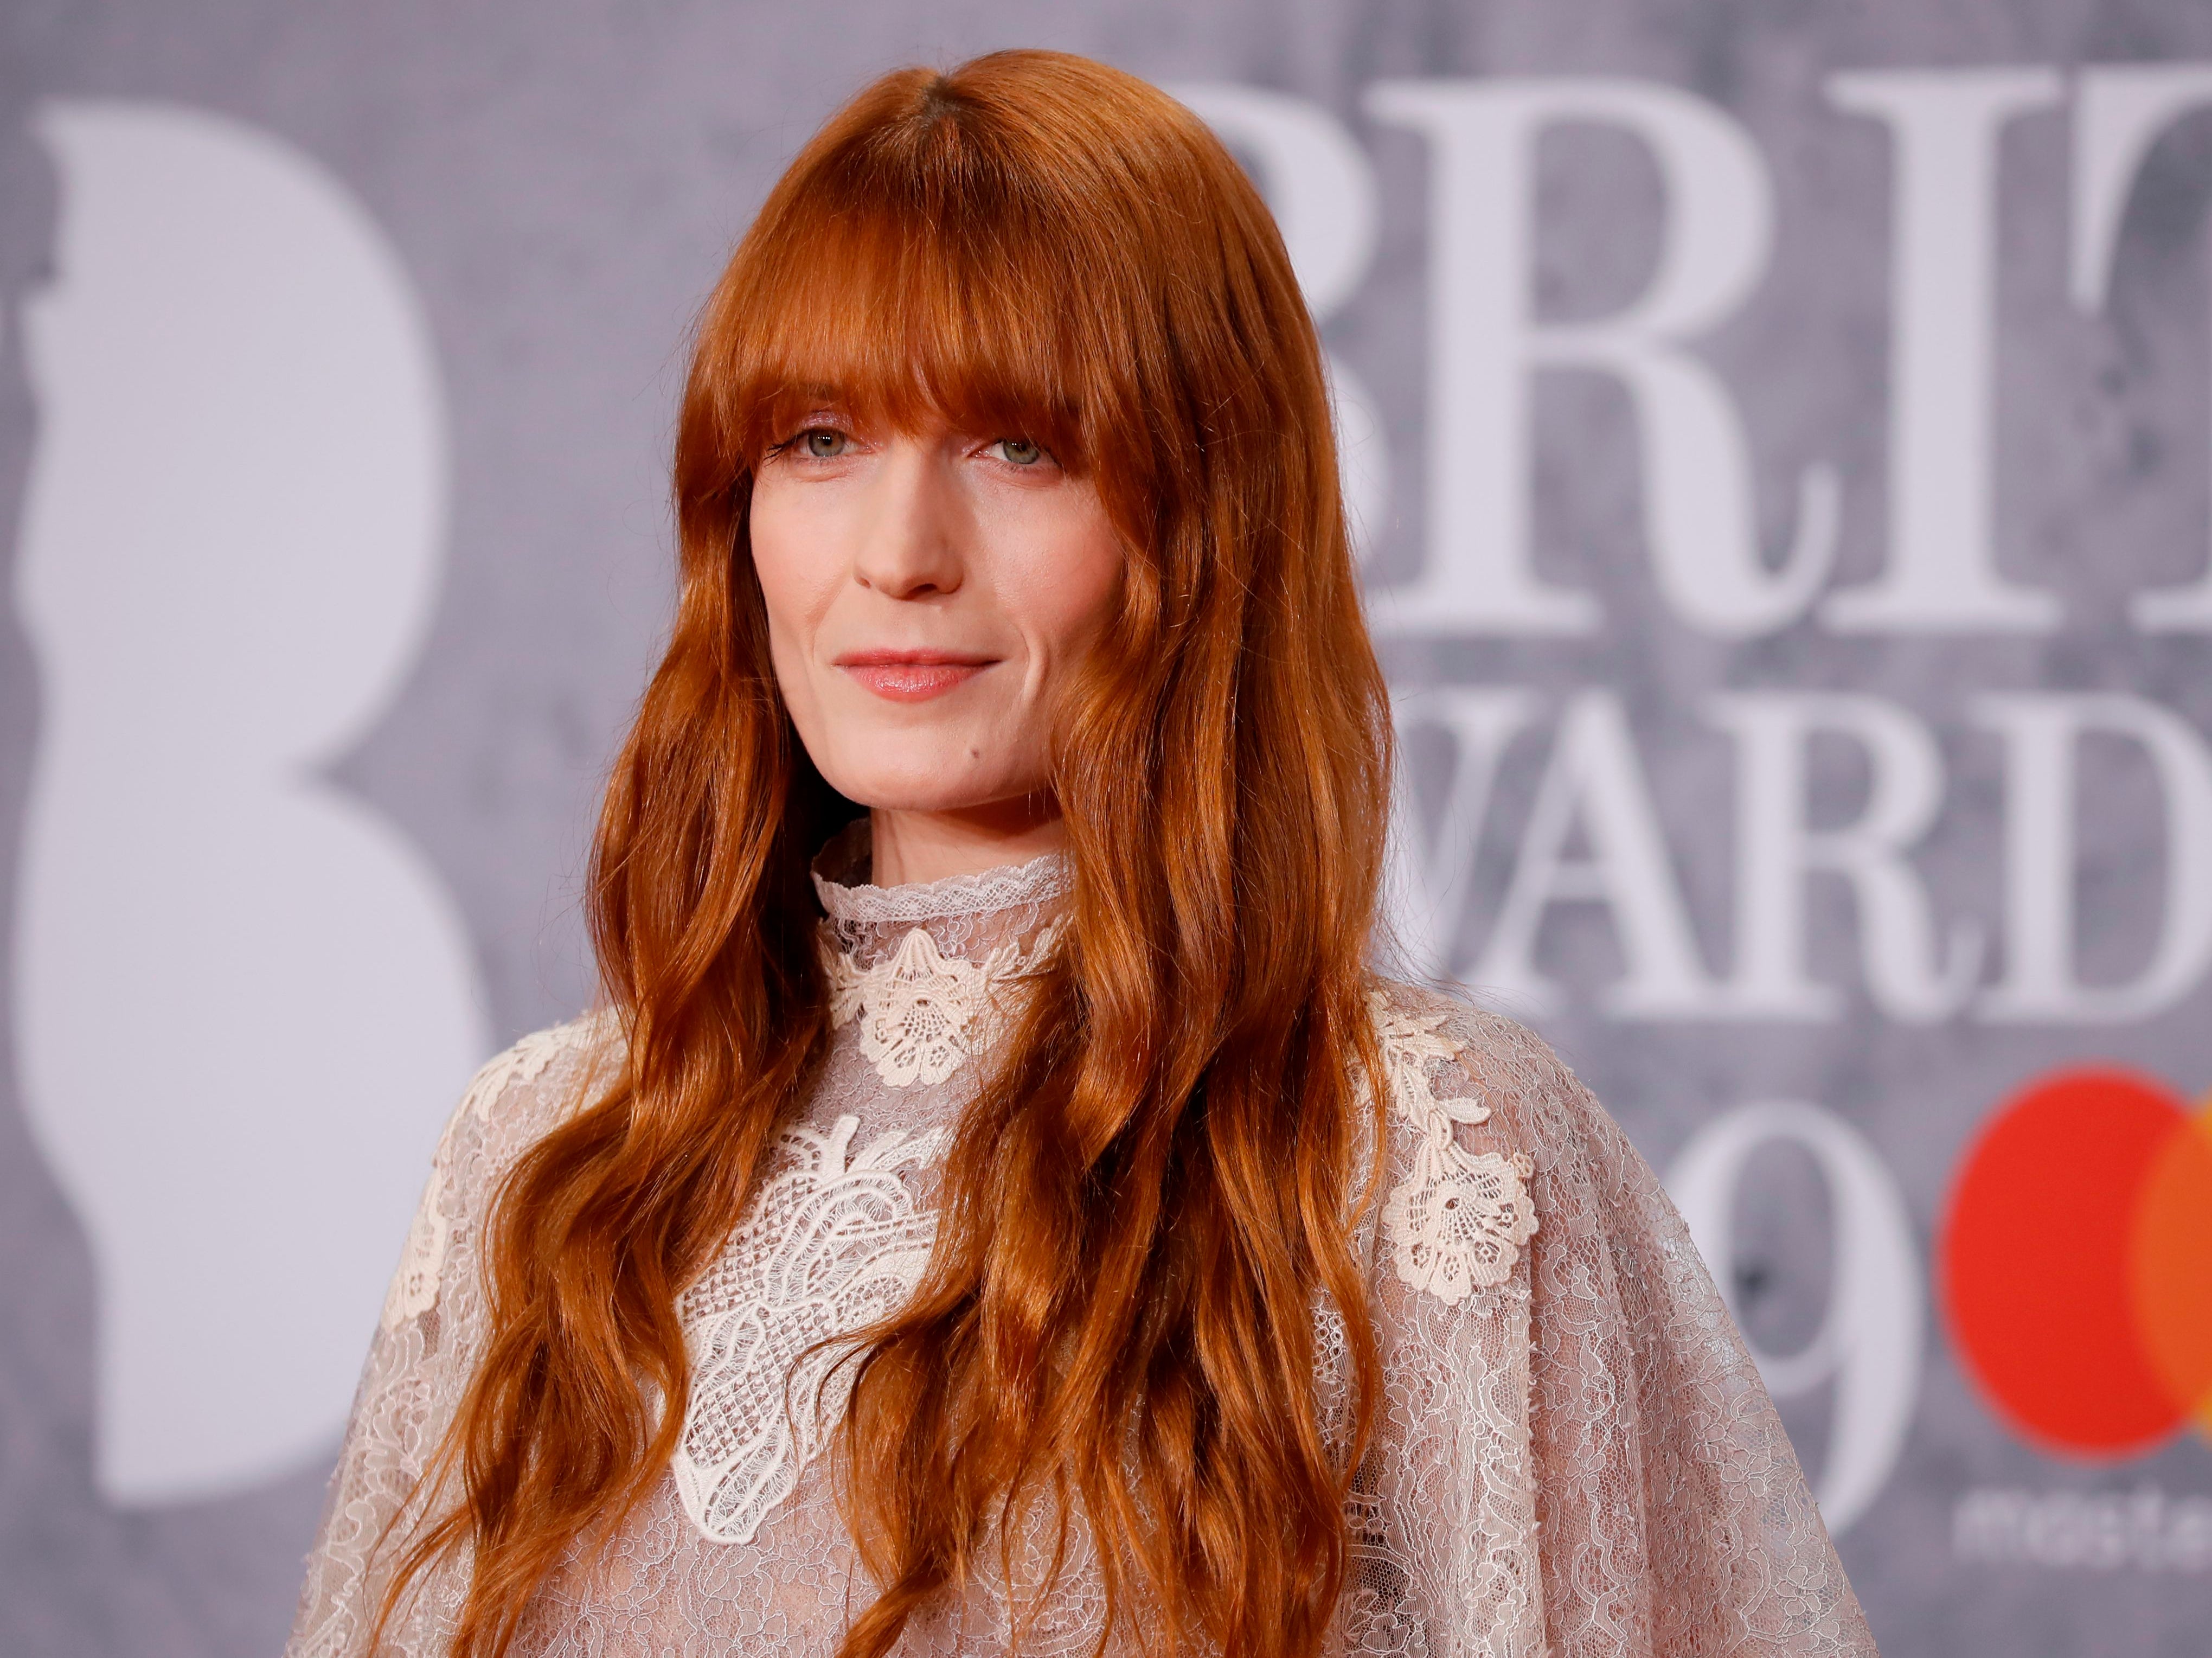 Florence Welch at the Brit Awards